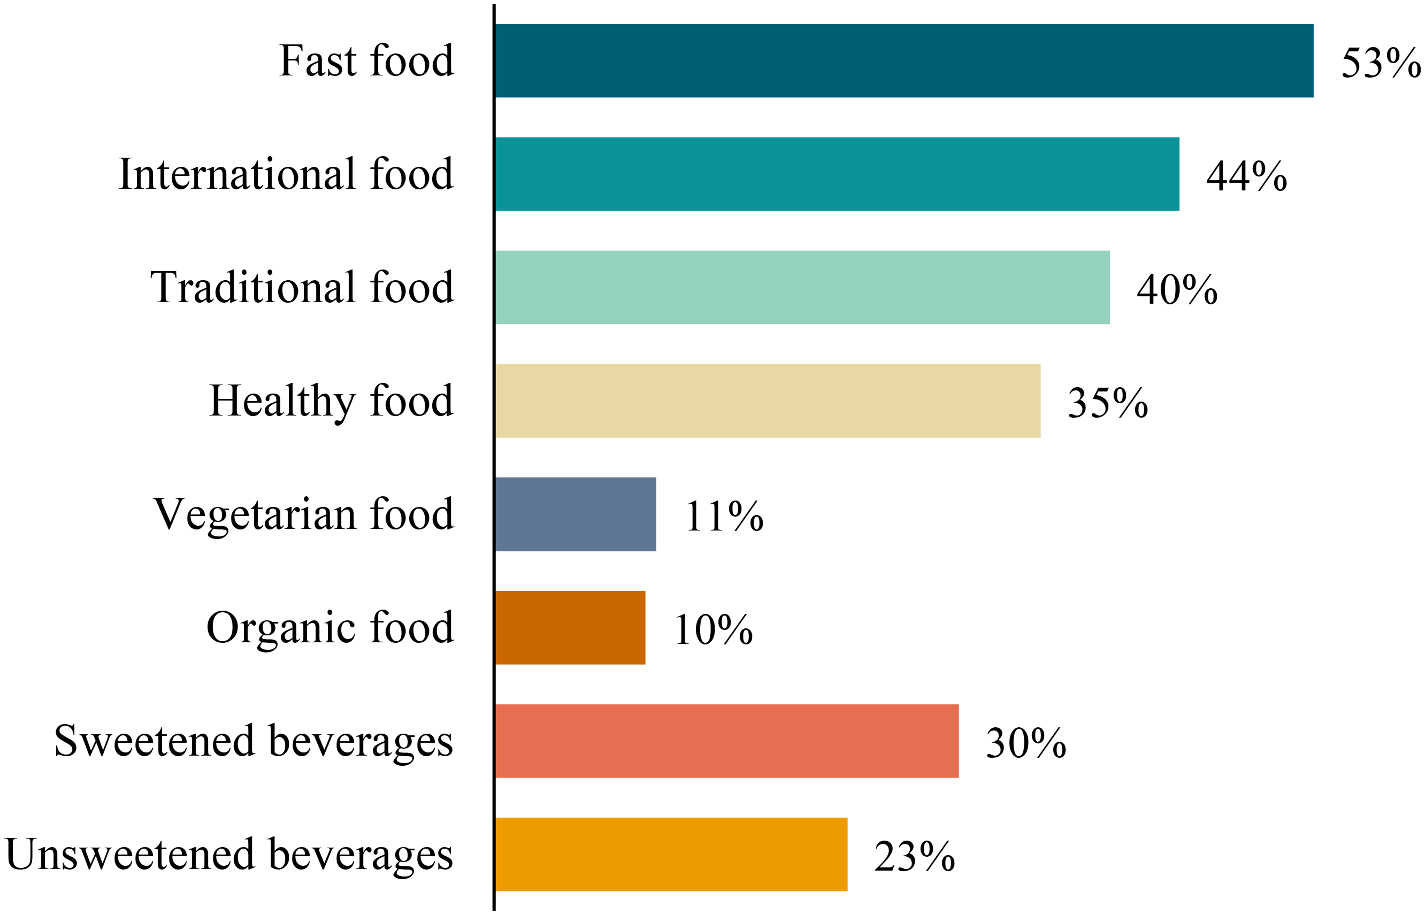 Response of the consumers to the menu calorie-labeling on online food ordering applications in Saudi Arabia